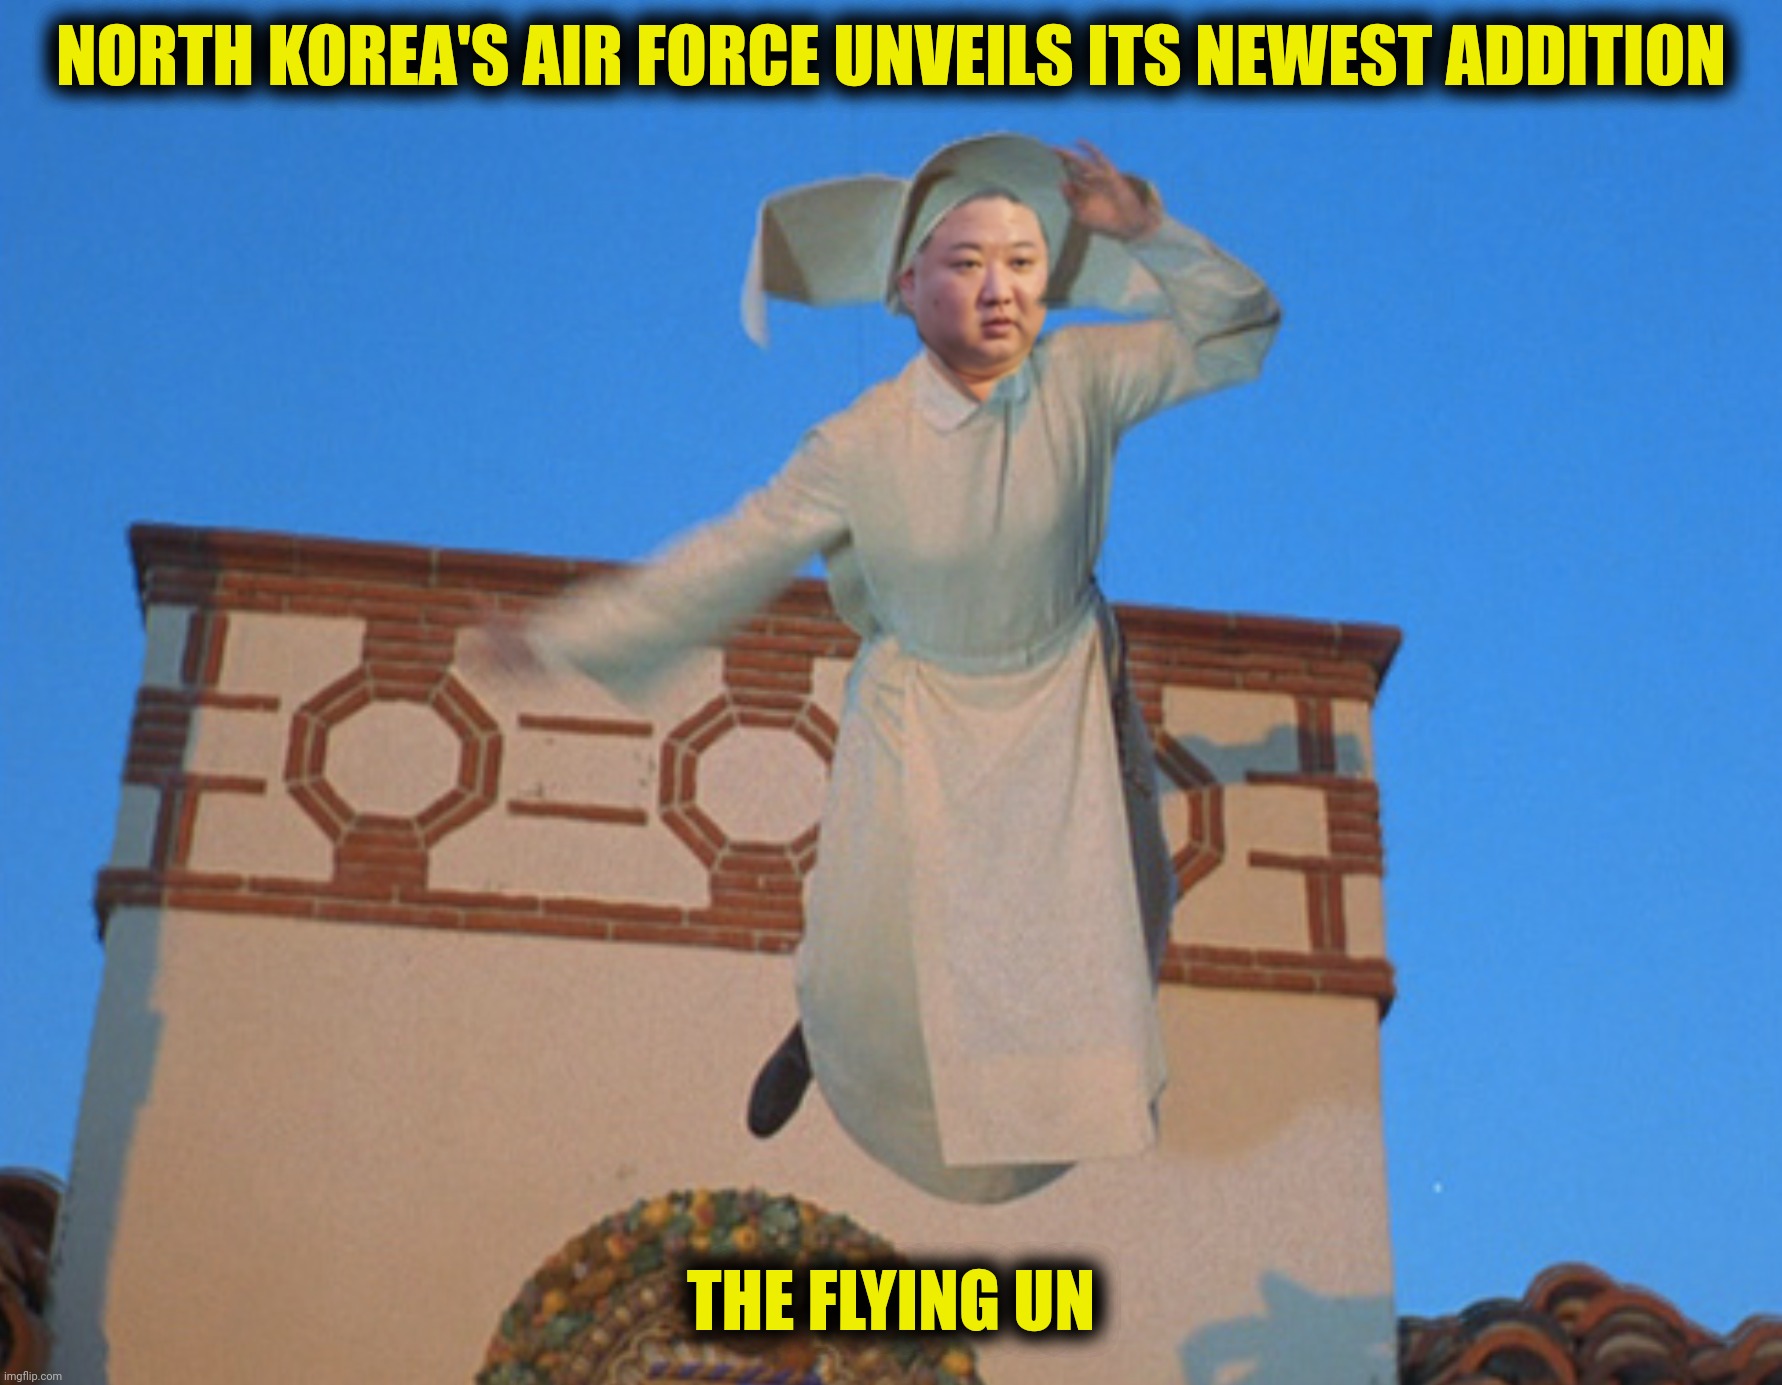 NORTH KOREA'S AIR FORCE UNVEILS ITS NEWEST ADDITION THE FLYING UN | made w/ Imgflip meme maker